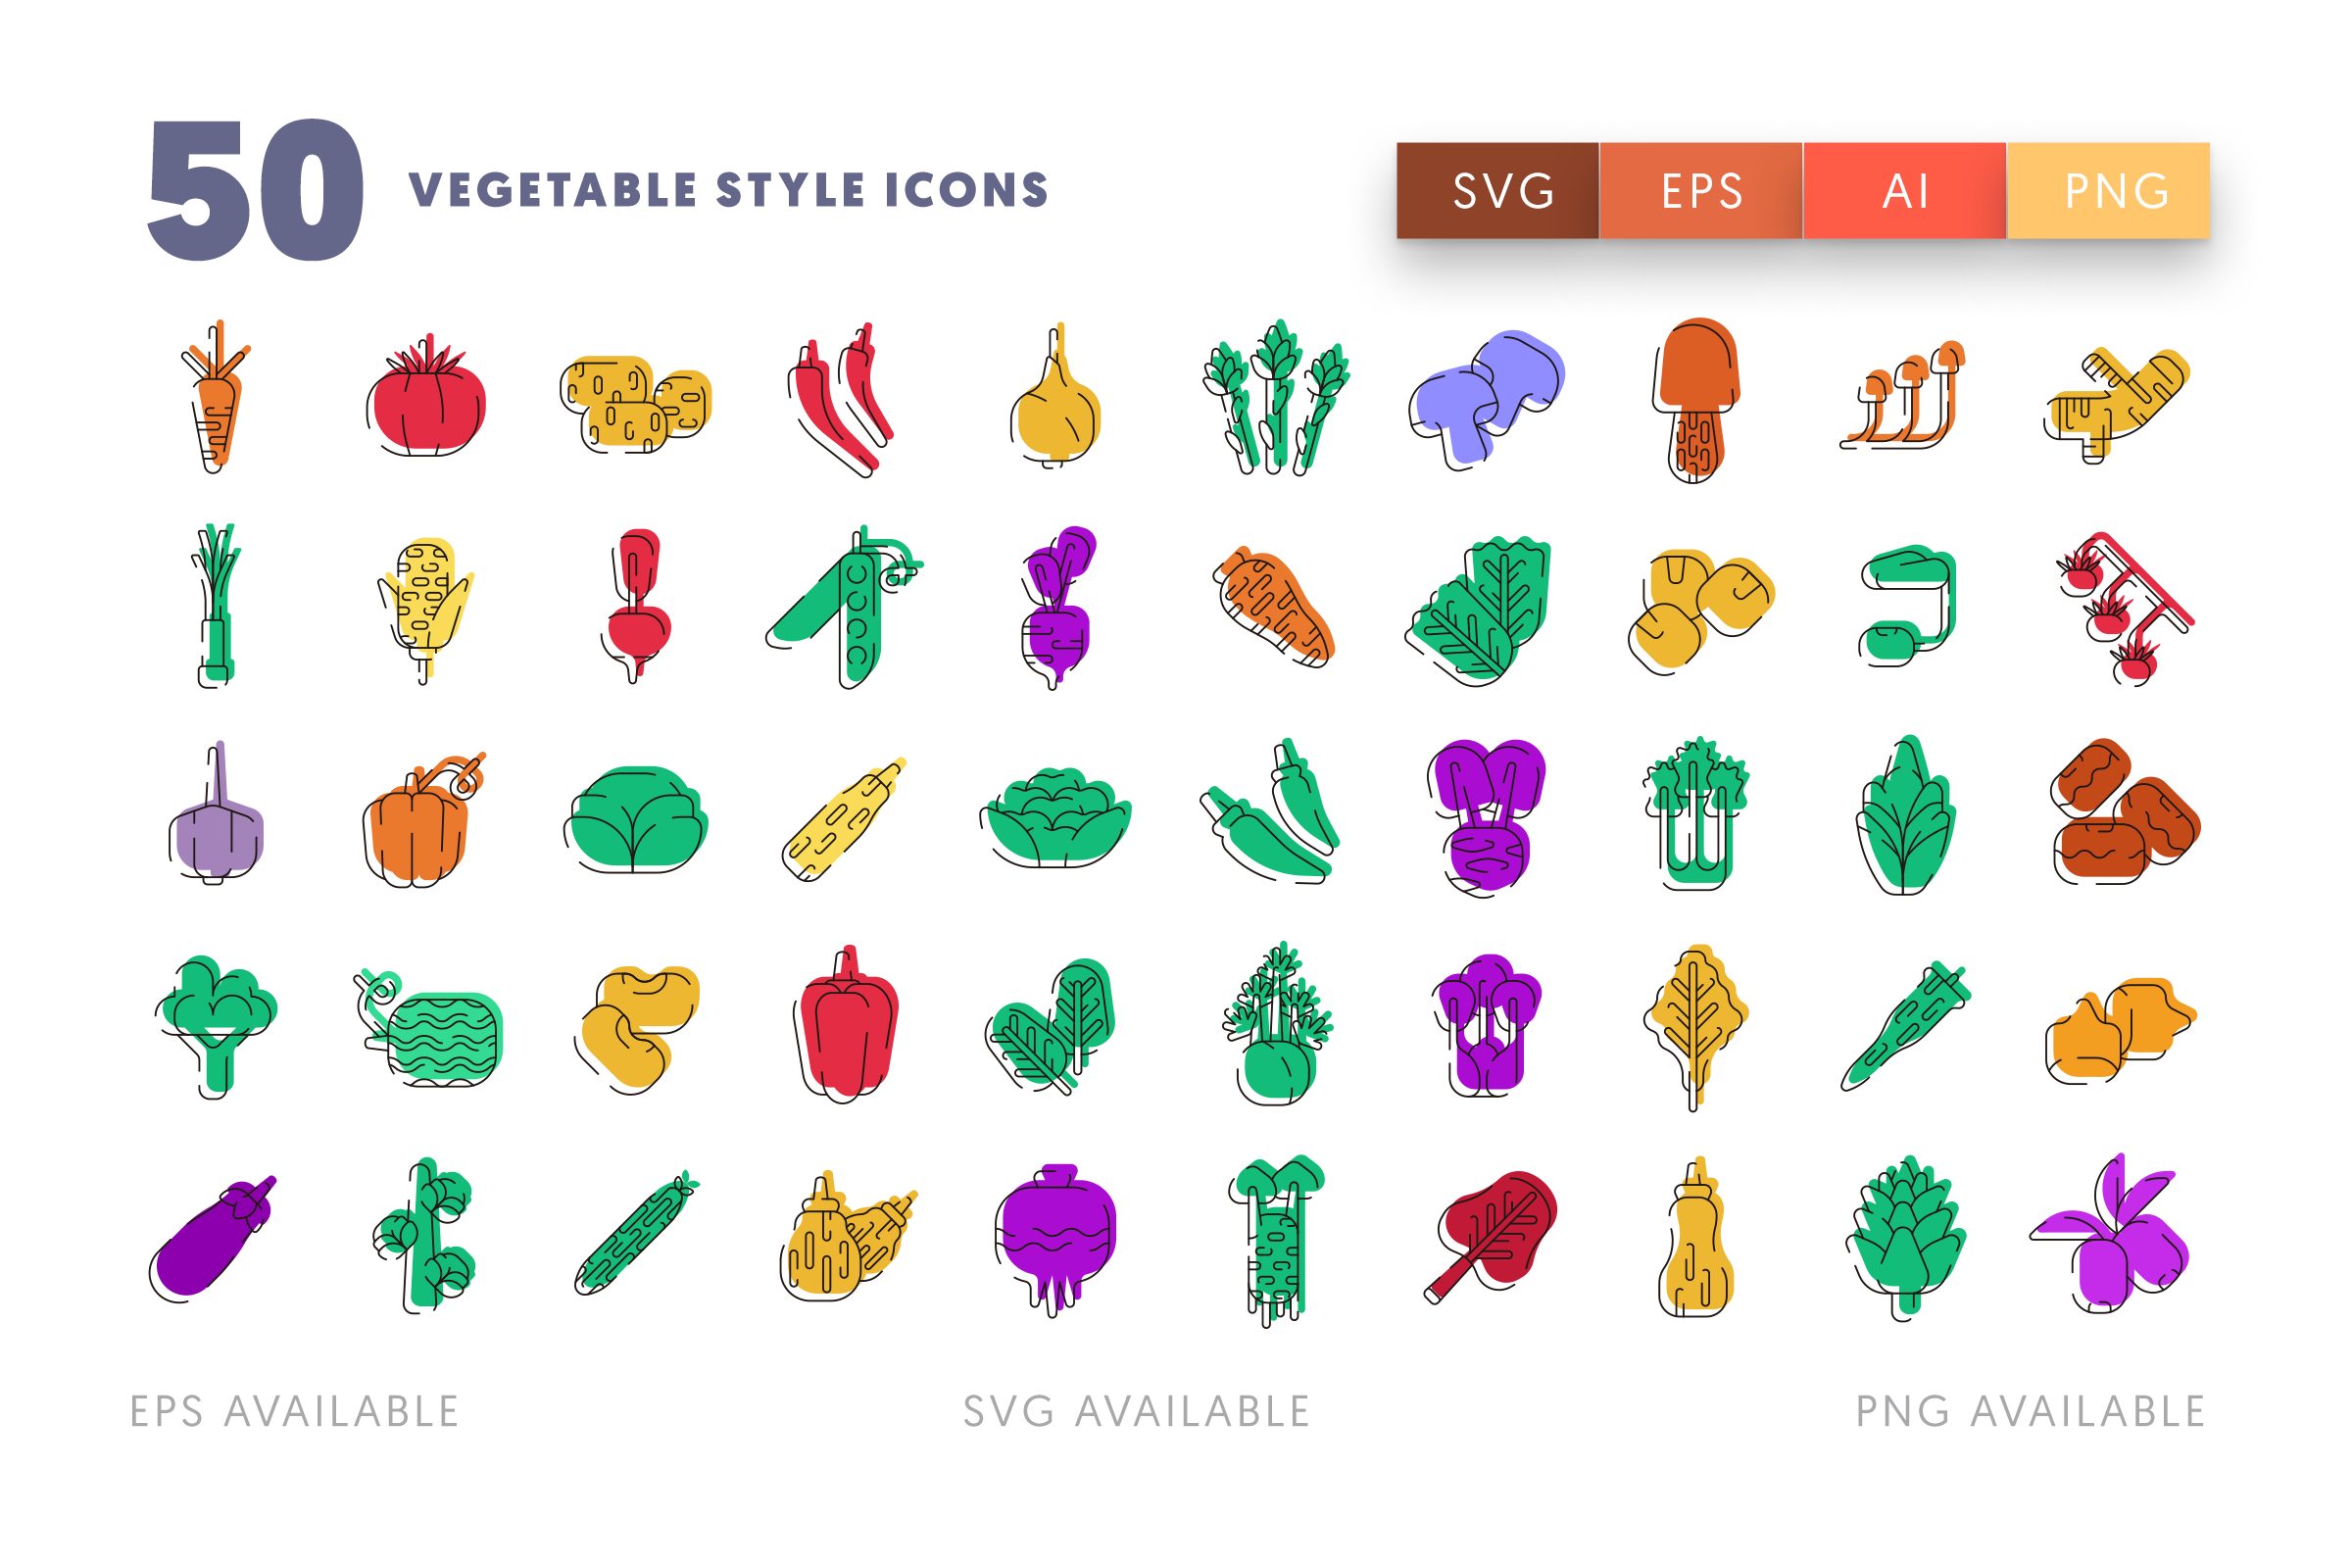 Vegetable Style icons png/svg/eps